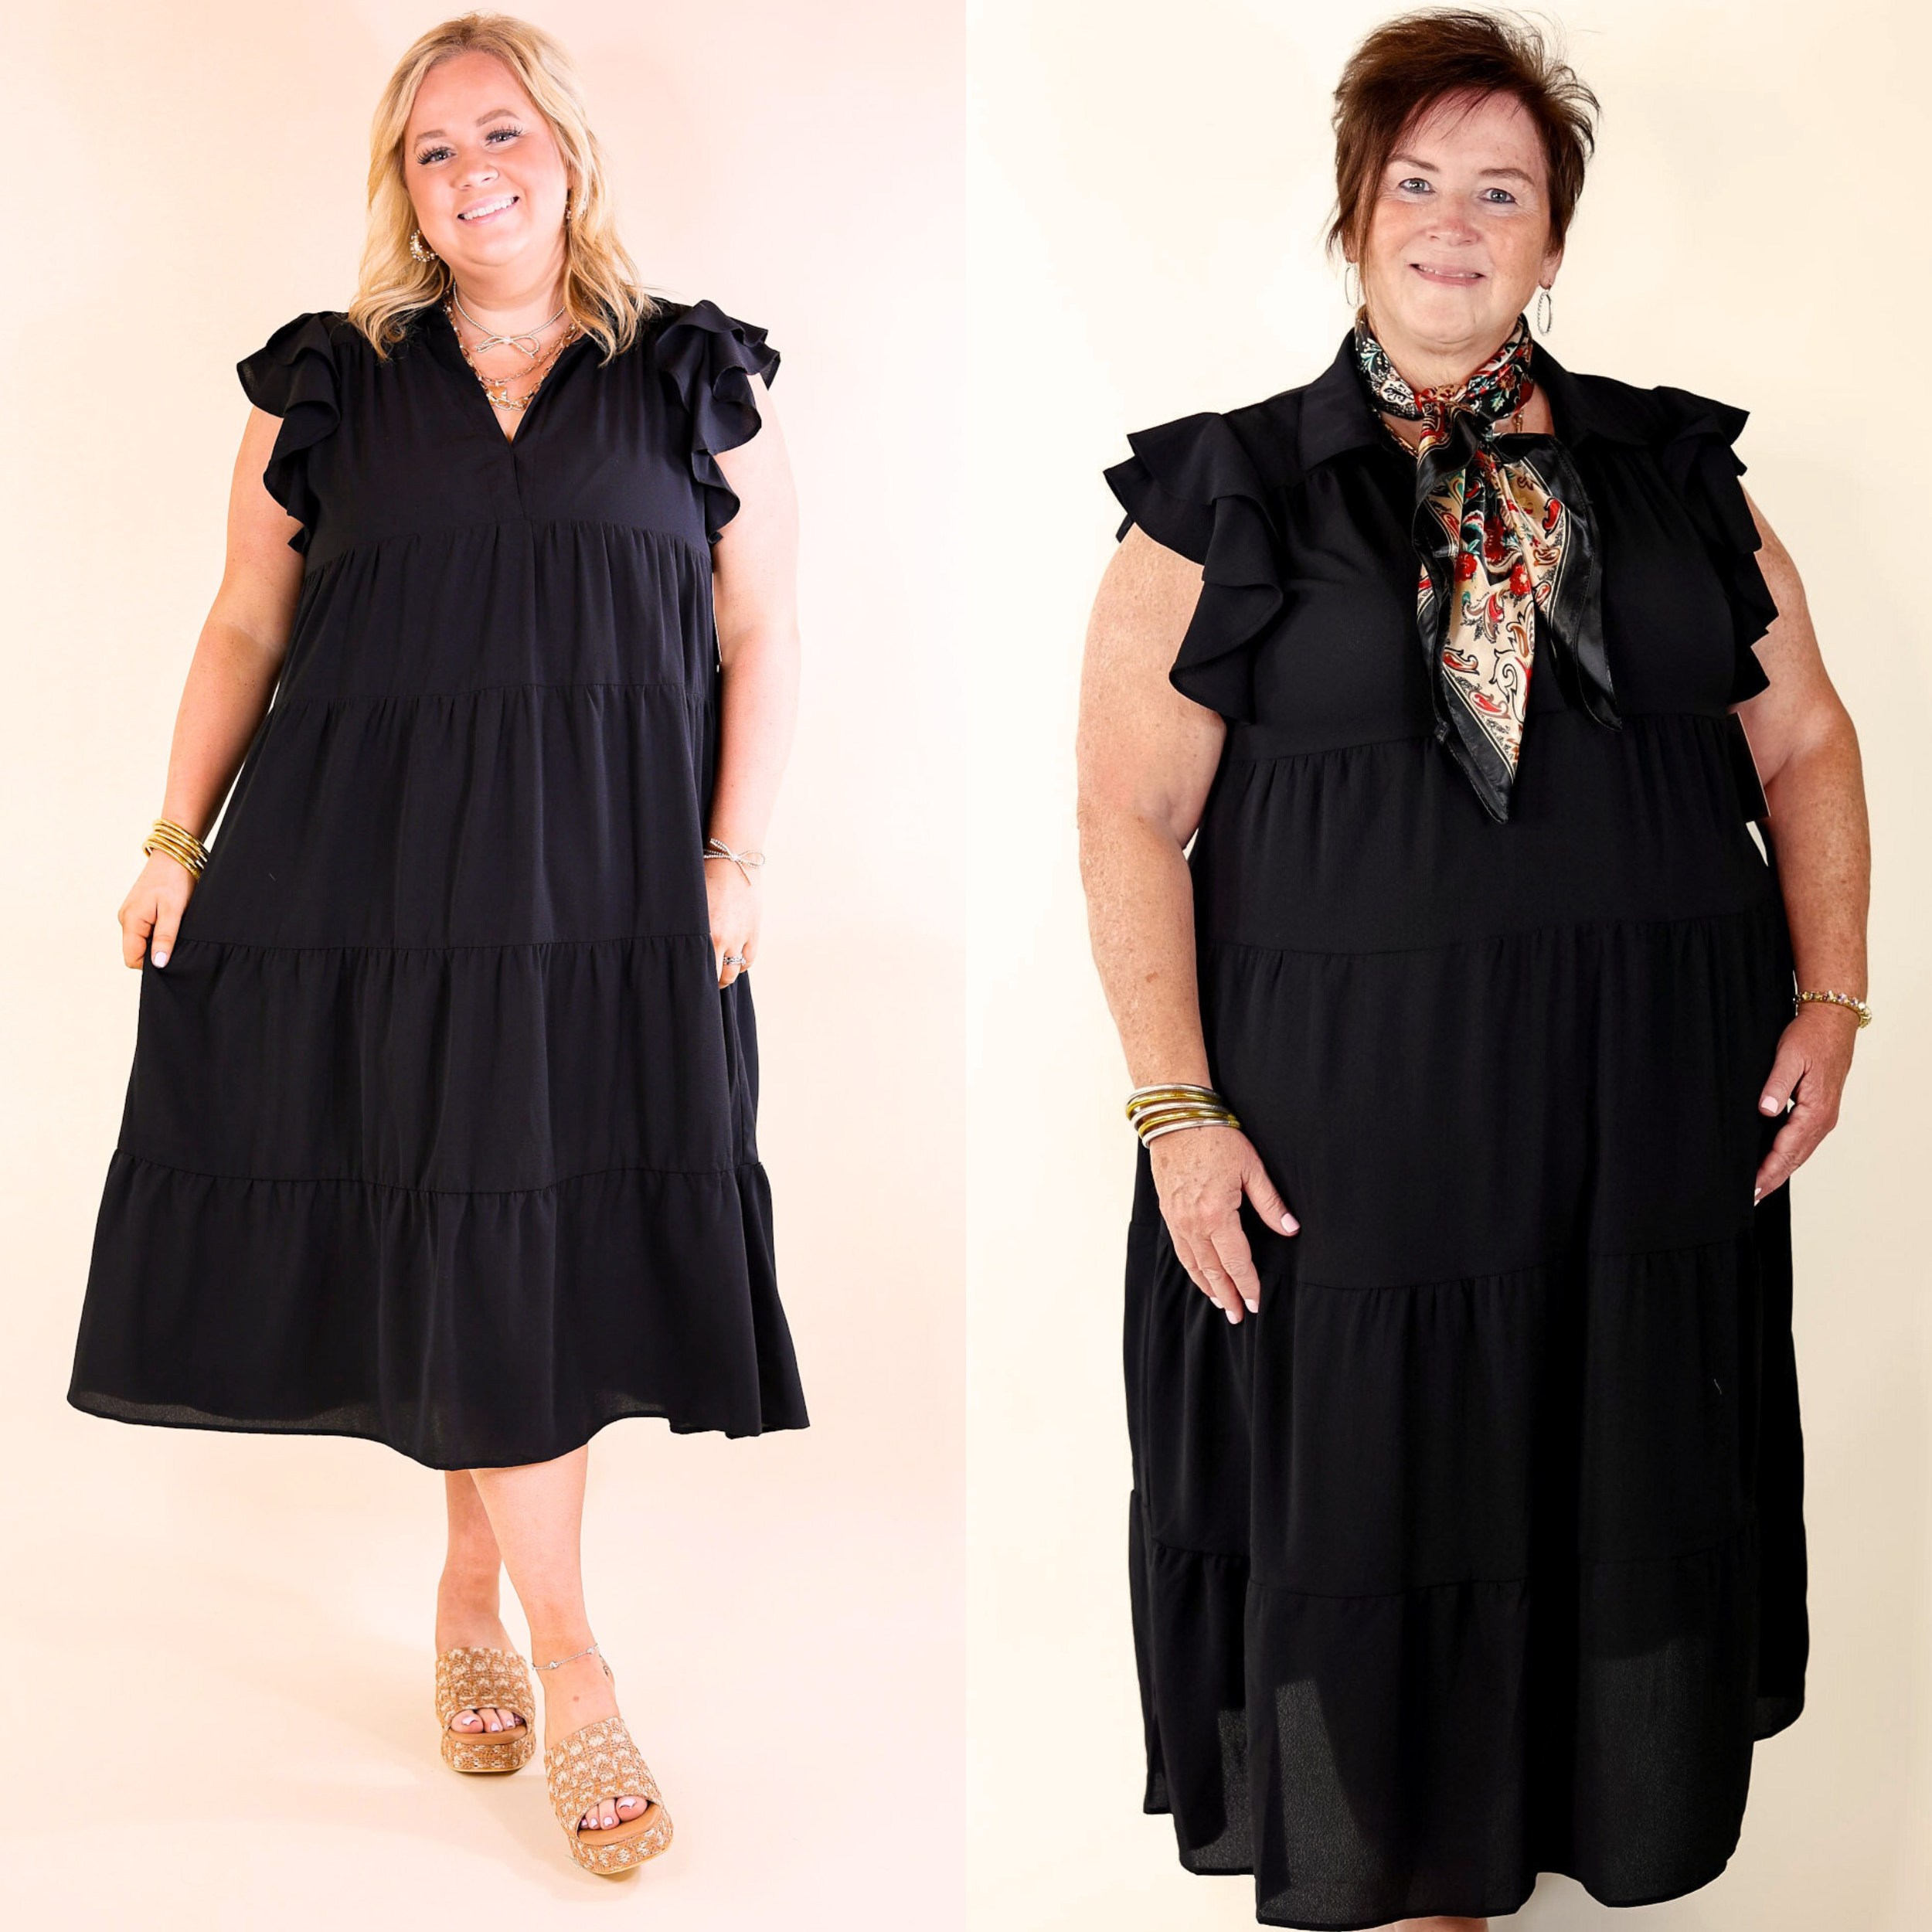 All Of A Sudden Tiered Midi Dress with Ruffle Cap Sleeves in Black